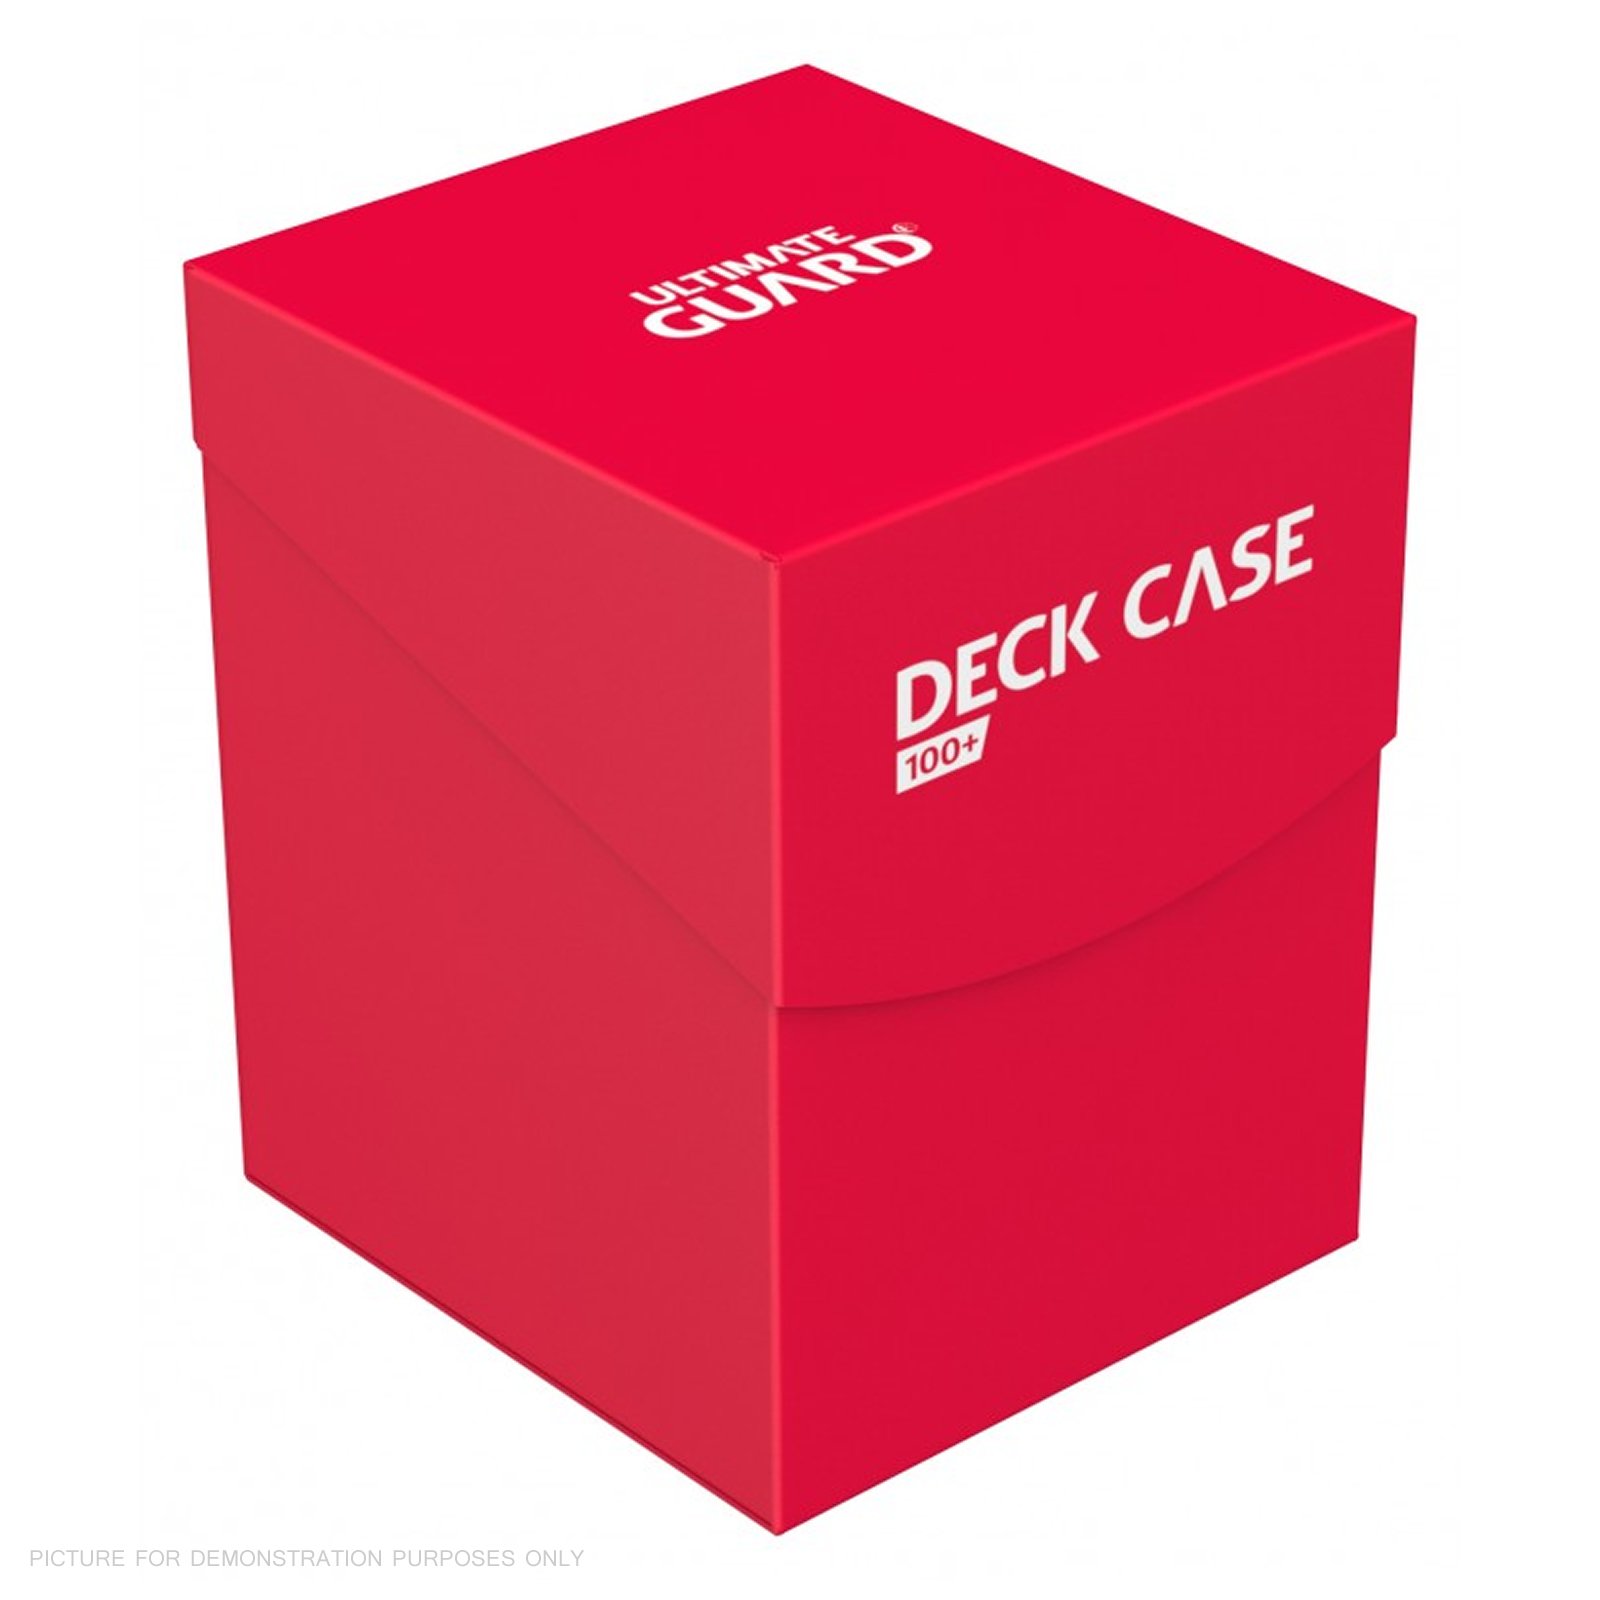 Deck Case Ultimate Guard Red (100+)